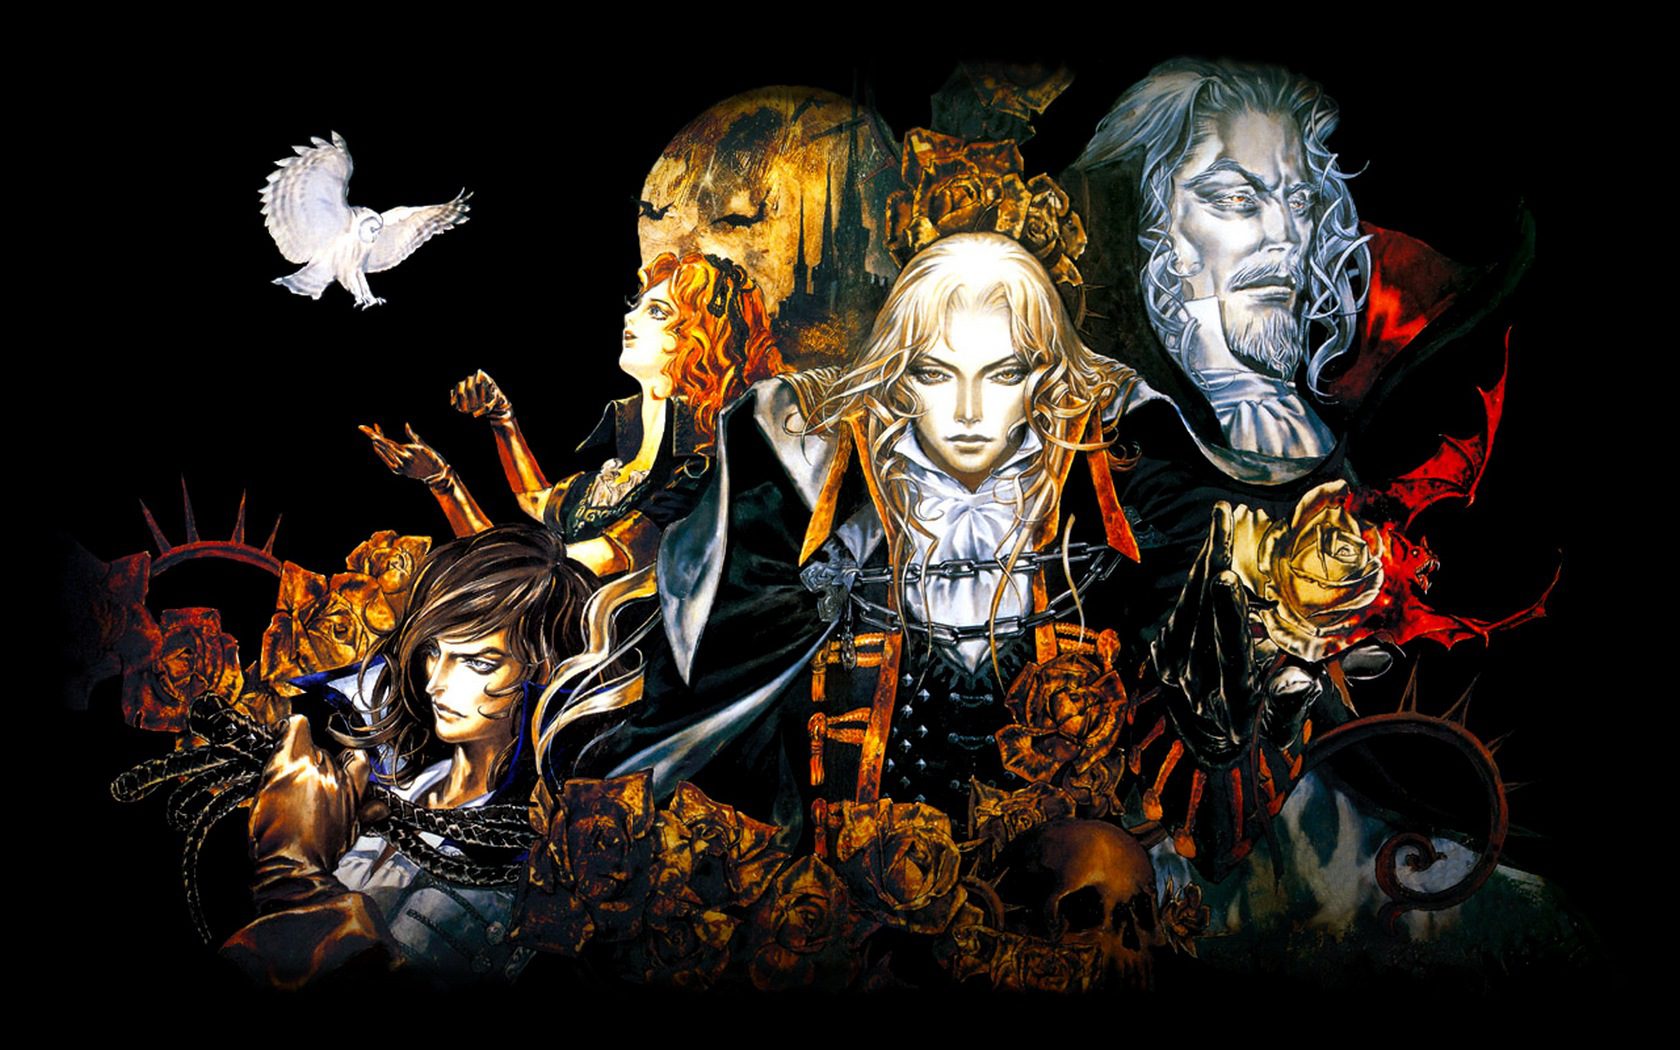 Castlevania: Symphony of the Night Suddenly Releases on Mobiles Without Warning